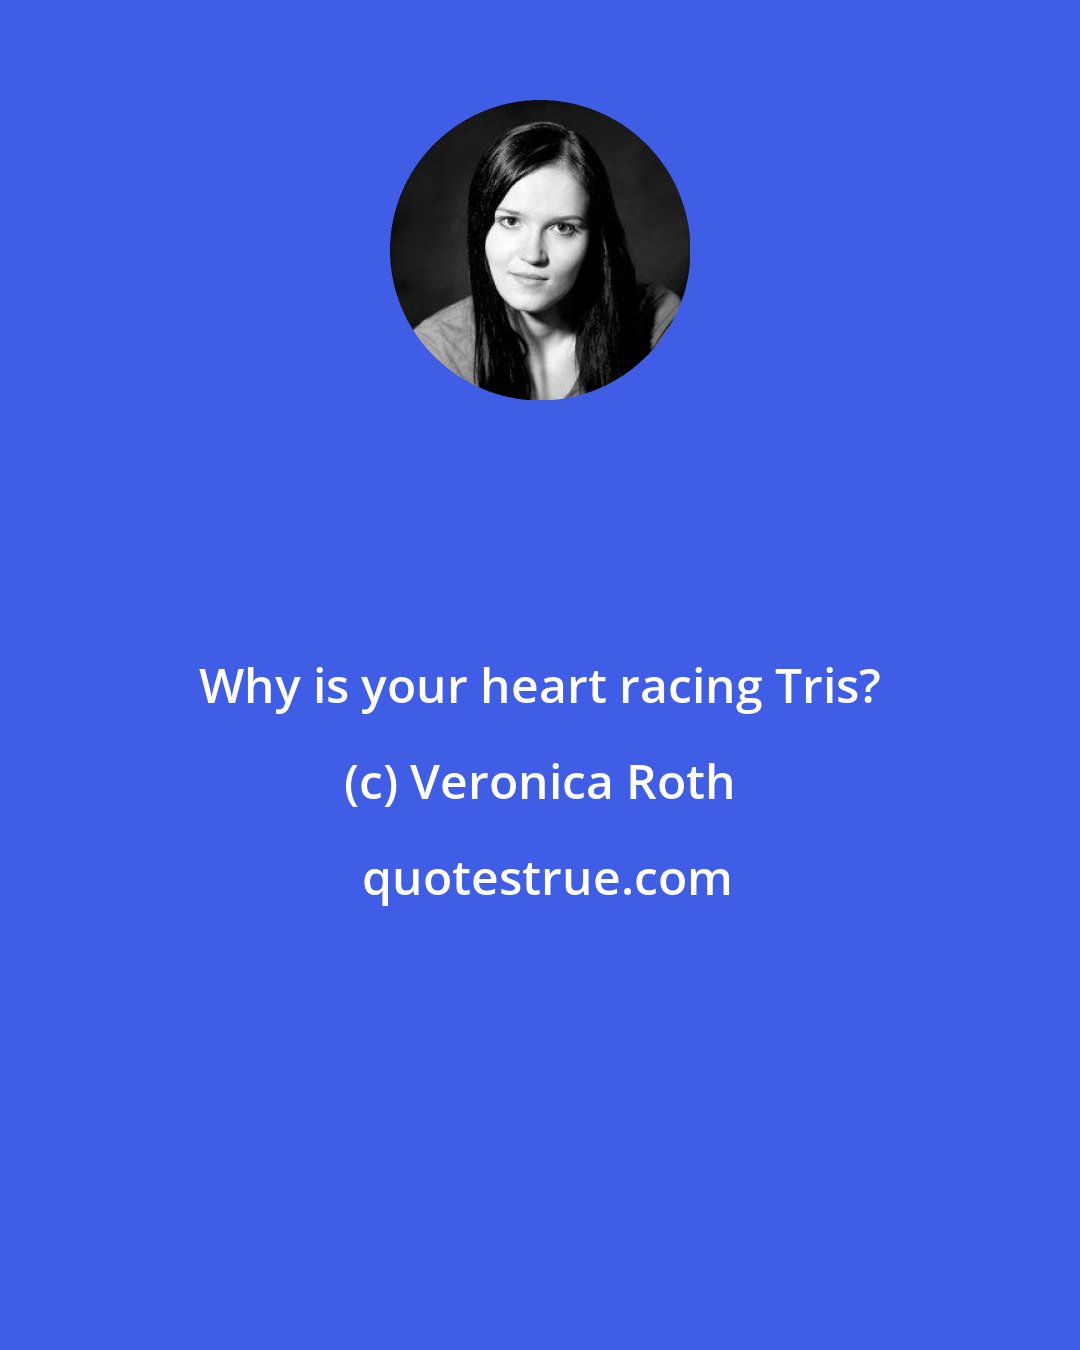 Veronica Roth: Why is your heart racing Tris?